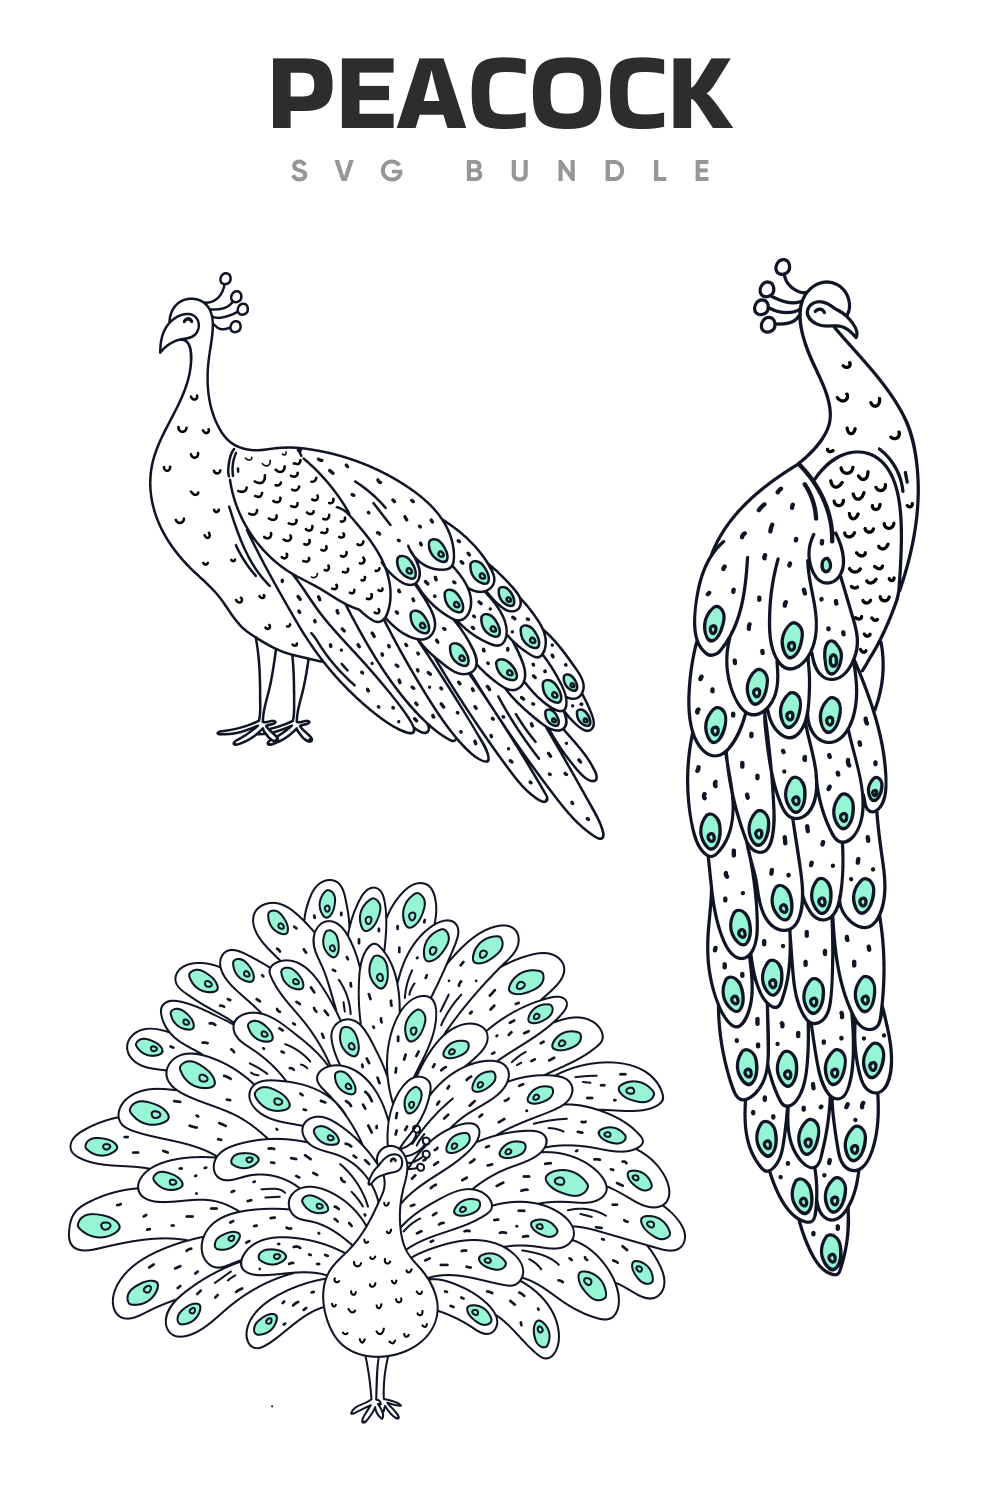 Coloring page with a peacock and a peacock.